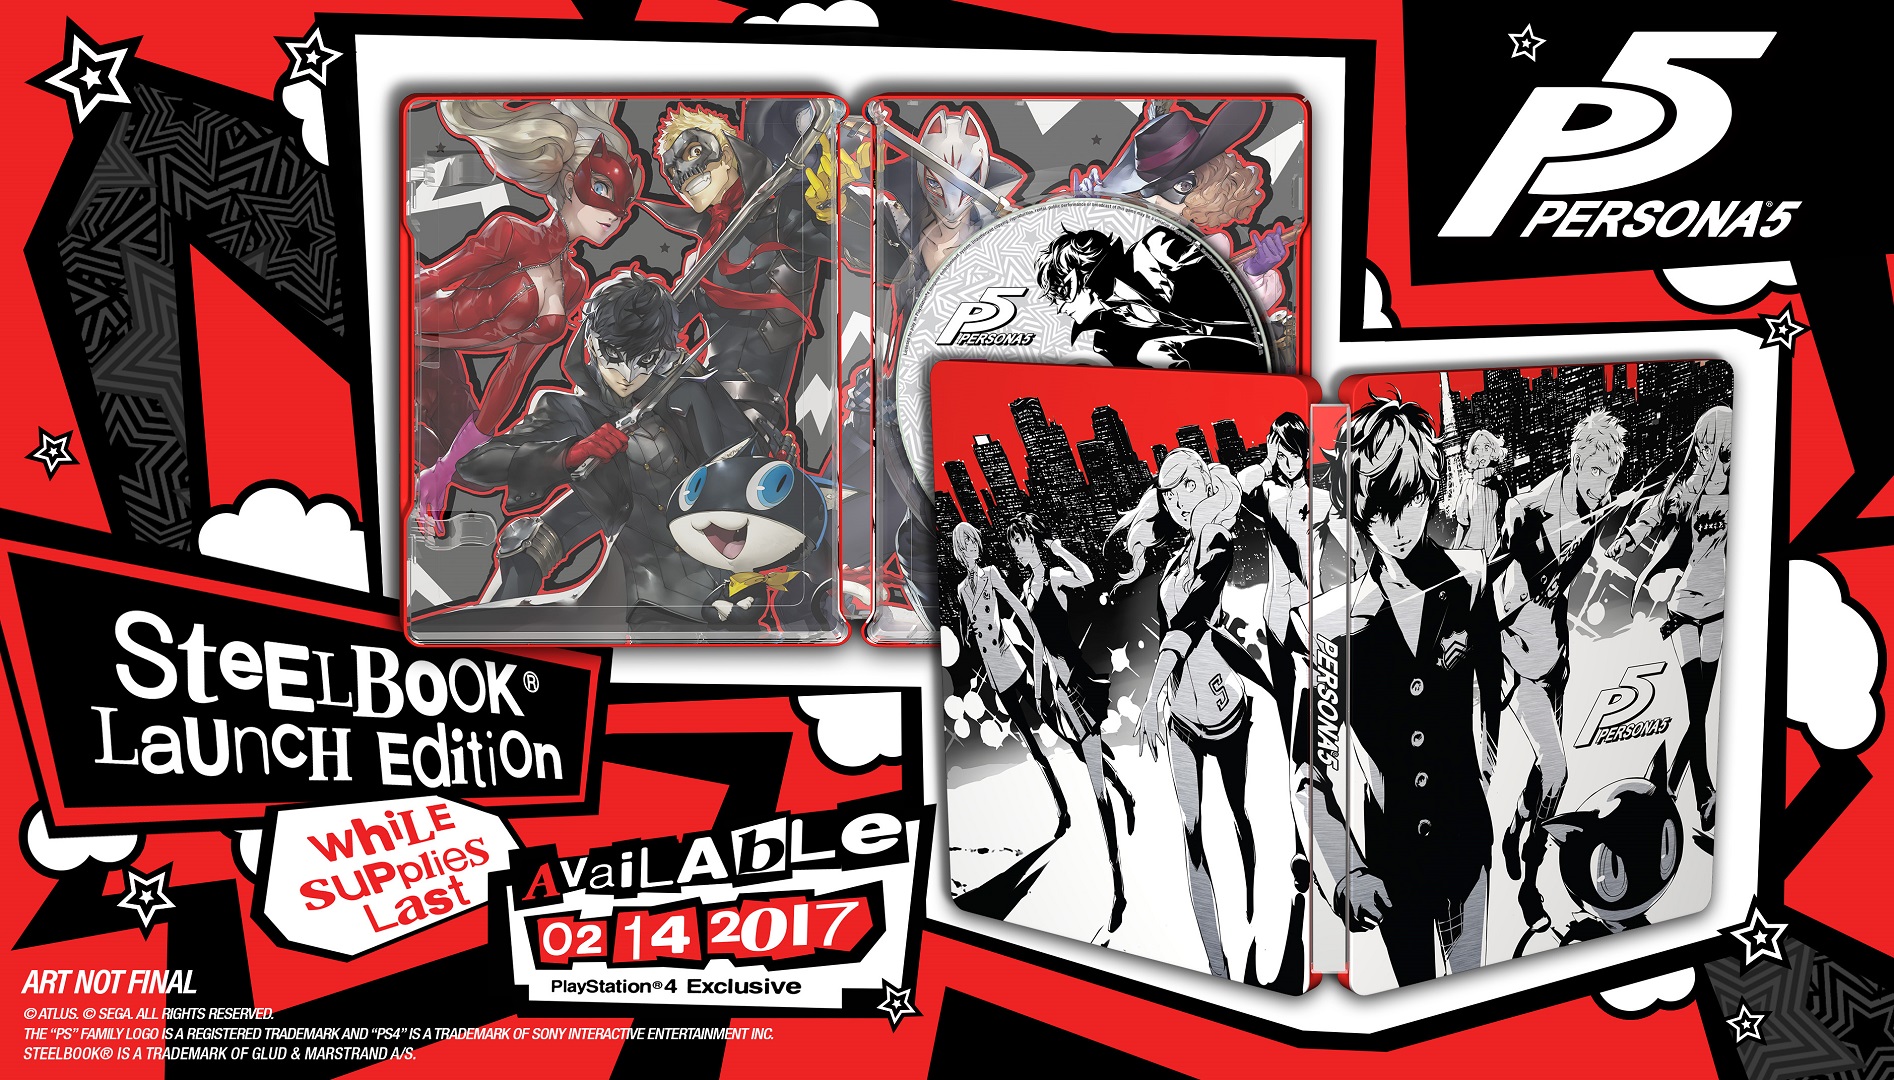 SteelBook Design for Persona 5 Launch Edition Revealed